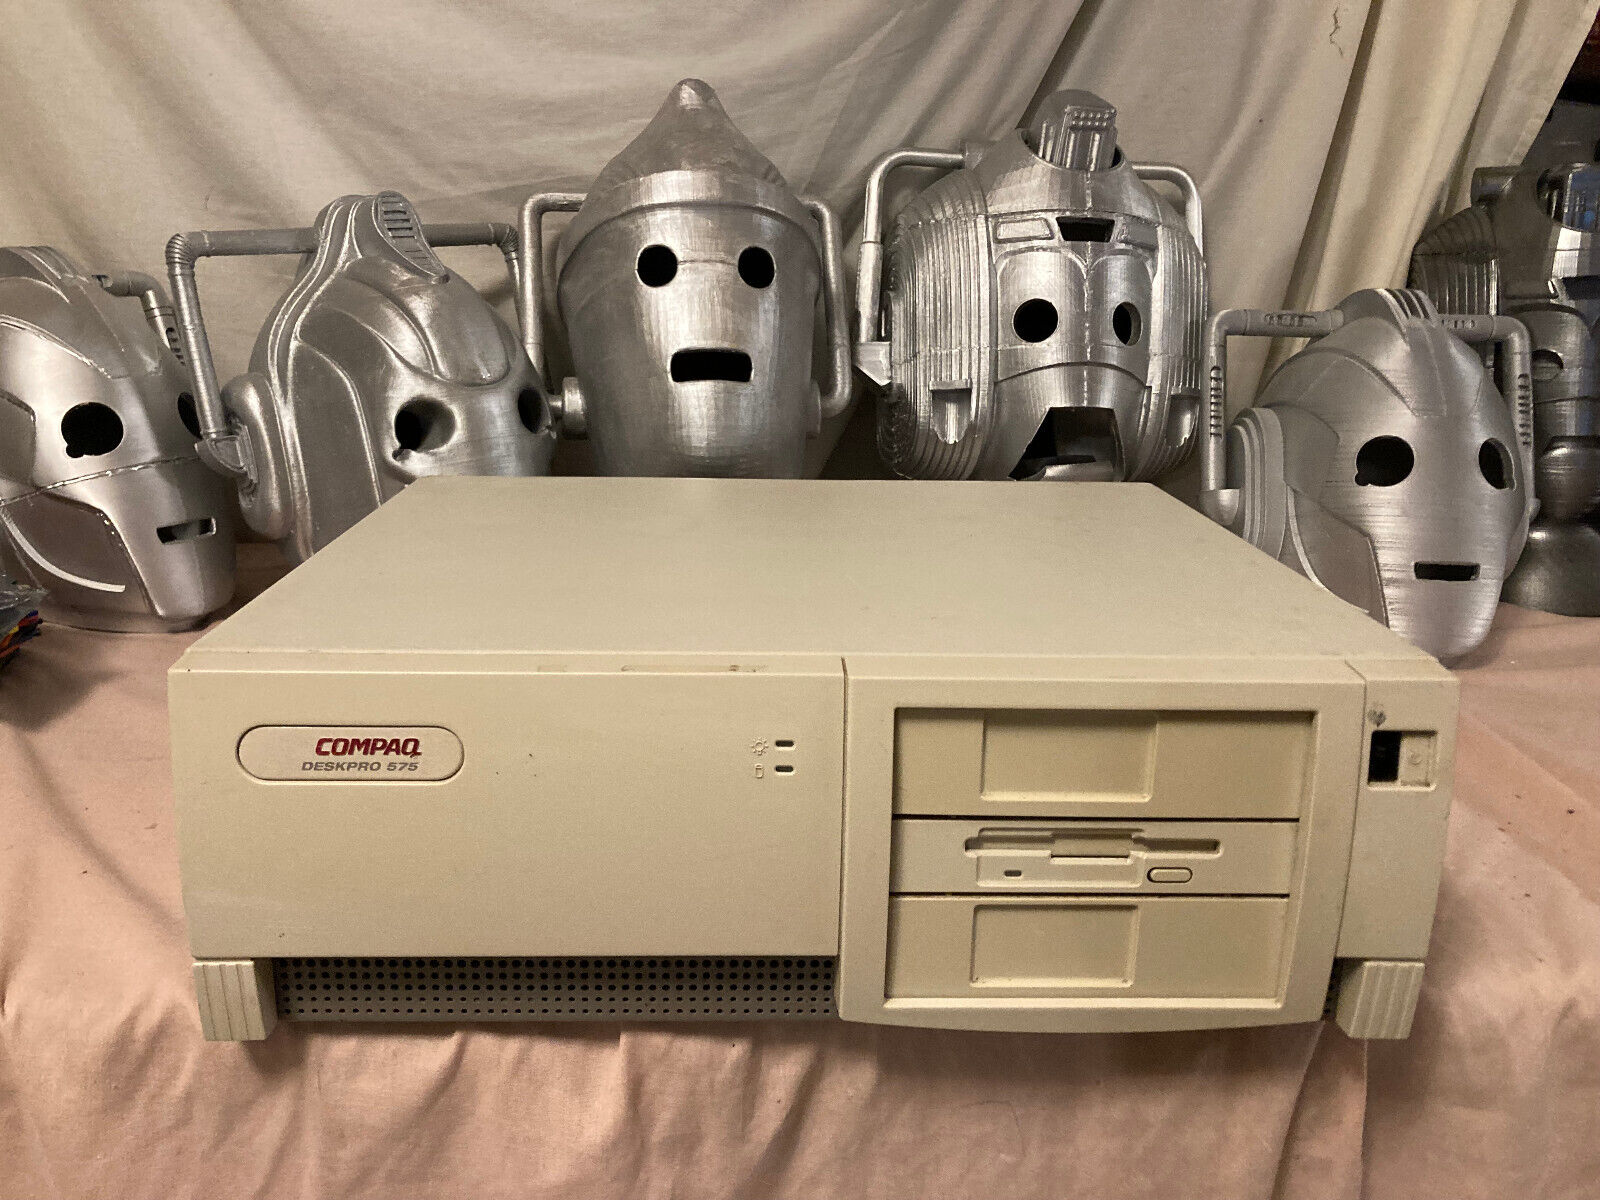 compaq deskpro 575 case, with motherboard,  power supply, and floppy drive PARTS